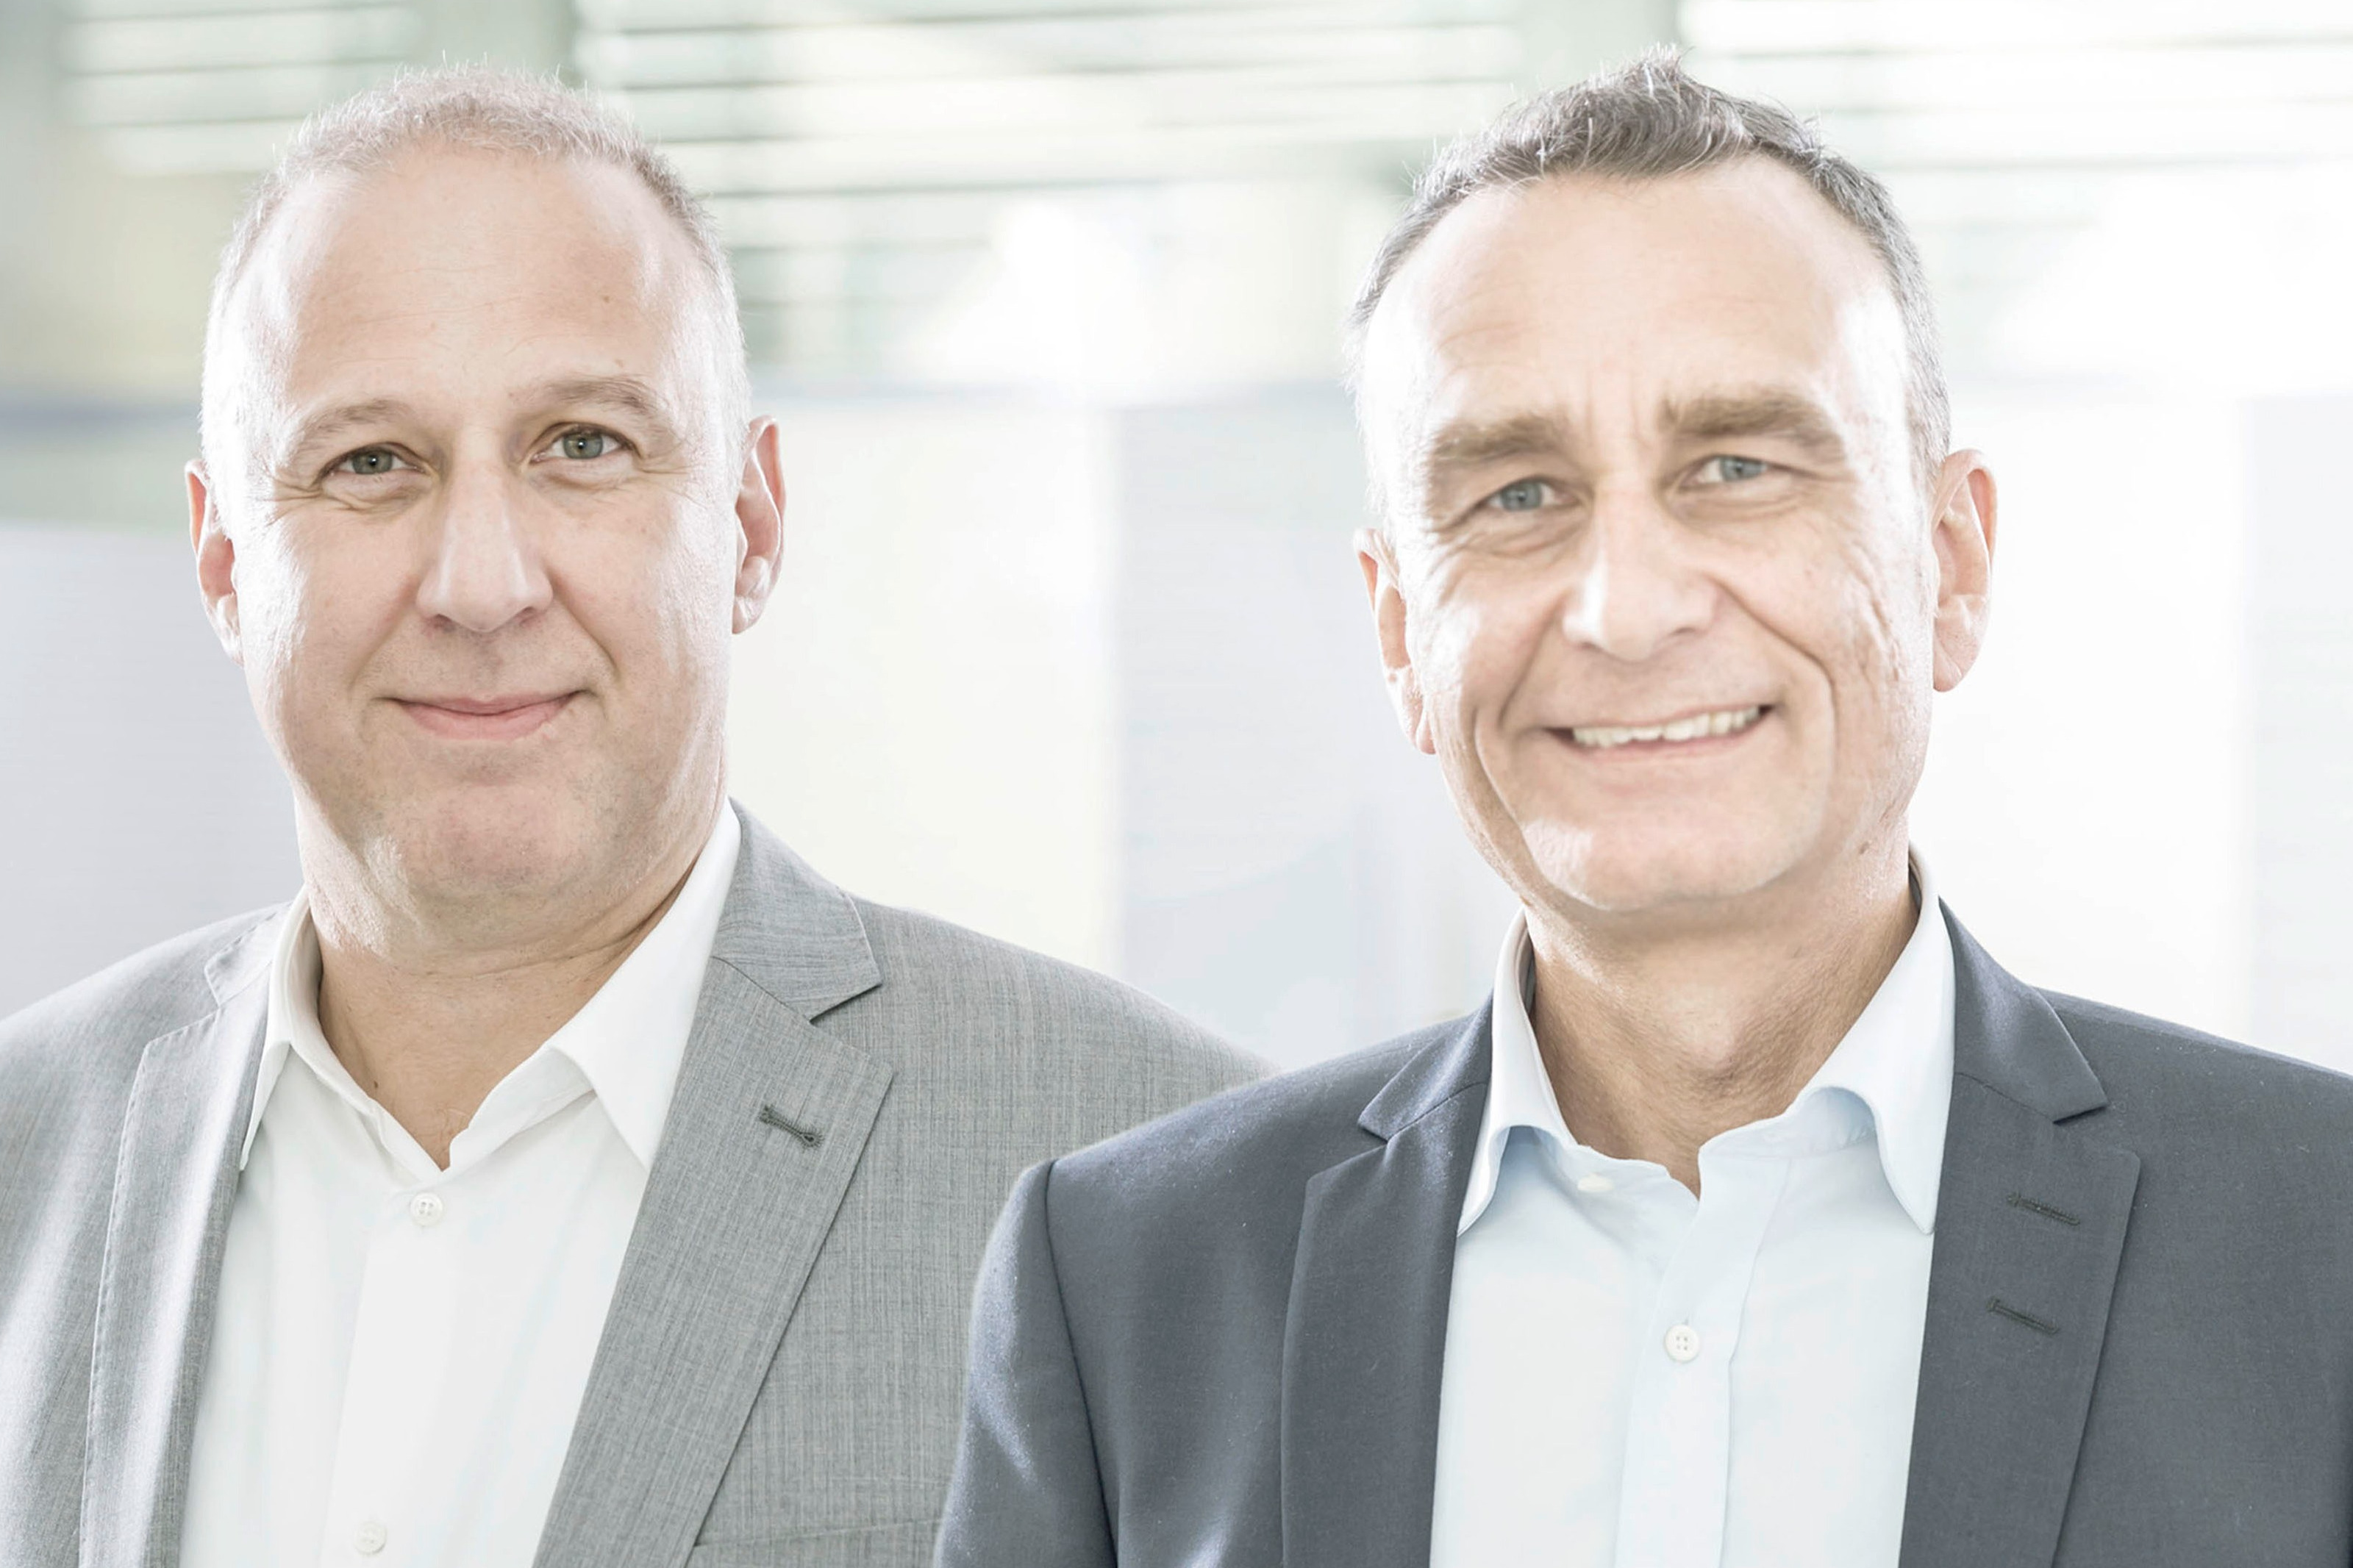 Urs Klipfel (l.) and Andreas Rieser (r.), the future heads of ATP’s Nuremberg office. Photo: ATP/Rauschmeir<br><span class='image_copyright'>ATP/Rauschmeir</span><br>